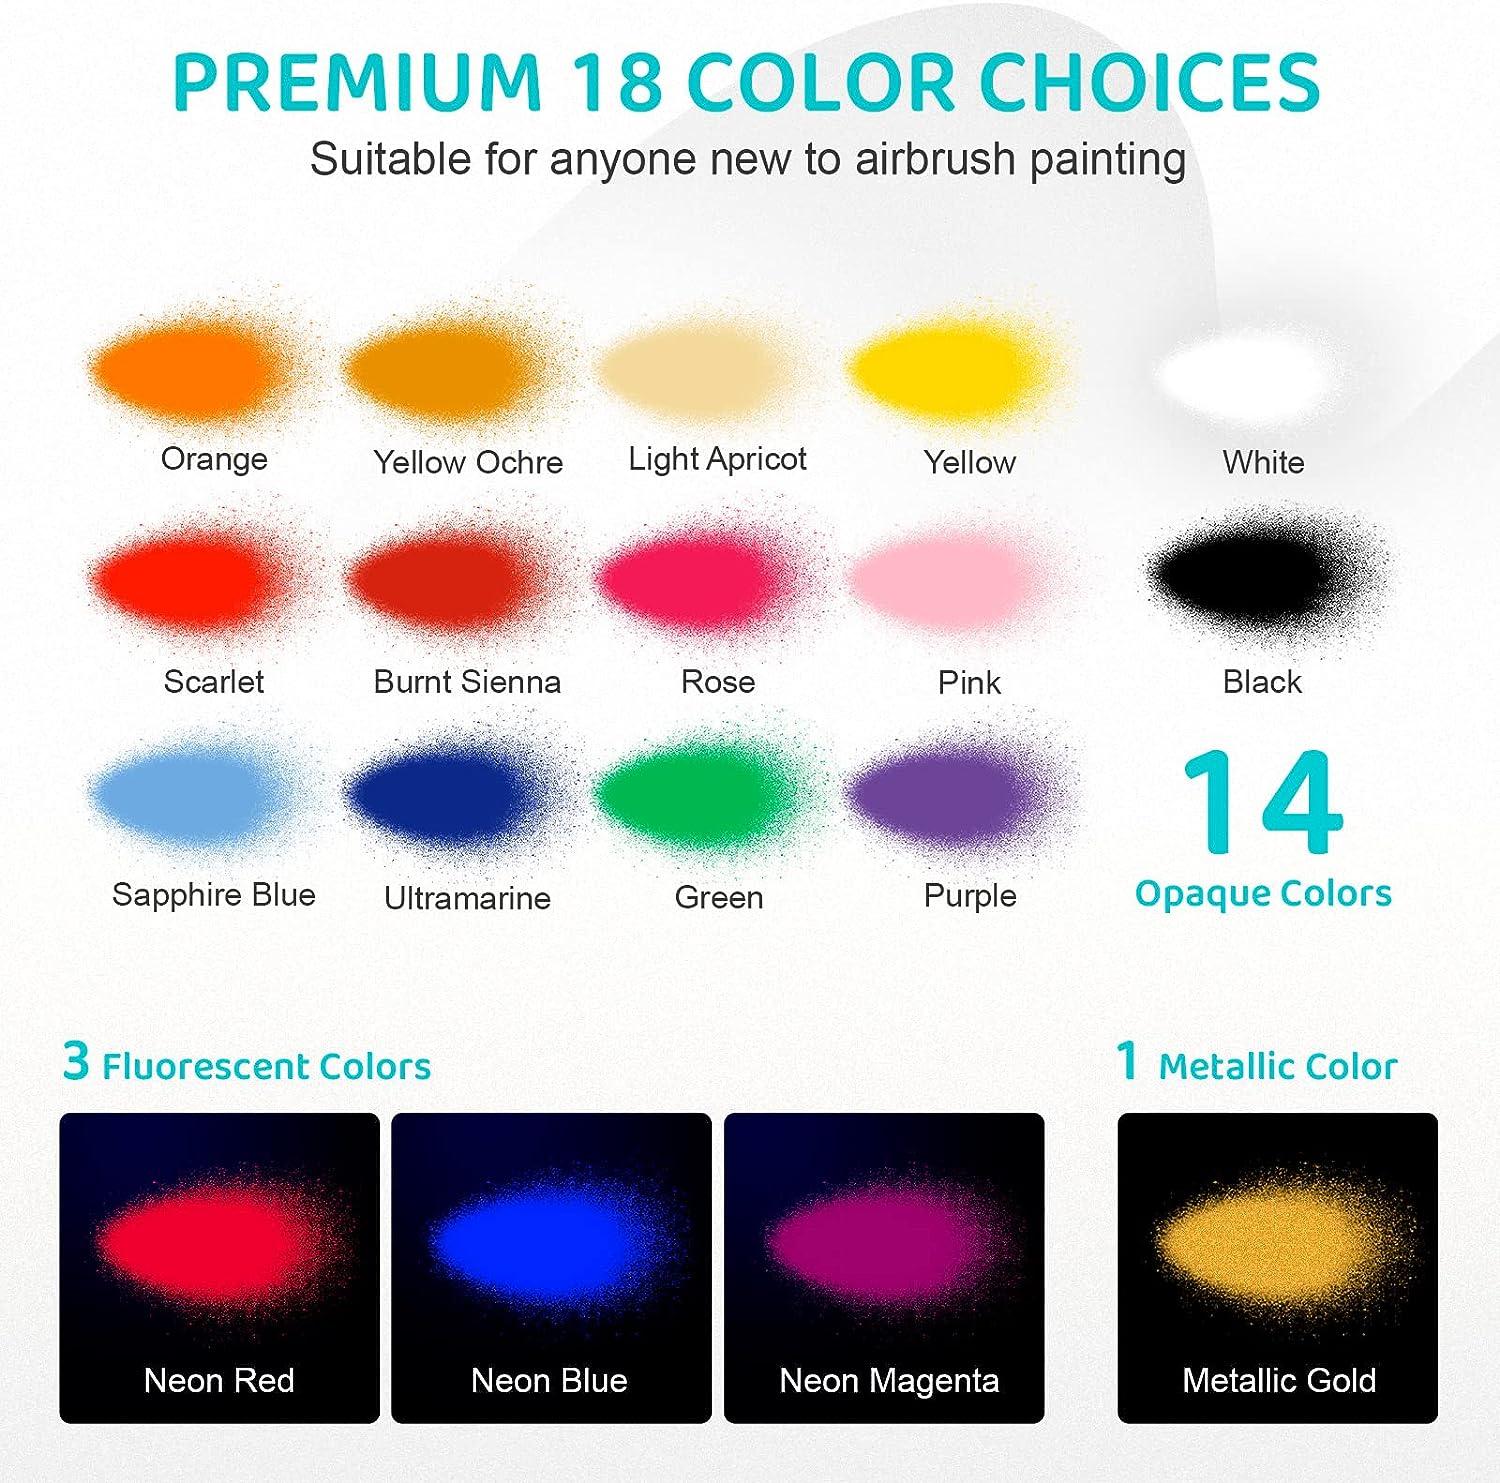 imyyds Airbrush Paint, 18 Color Acrylic Airbrush Paint Set, Water Based  Read-to-Spray Air Brush Painting Set, Airbrush Spray Paint Kit for Papers